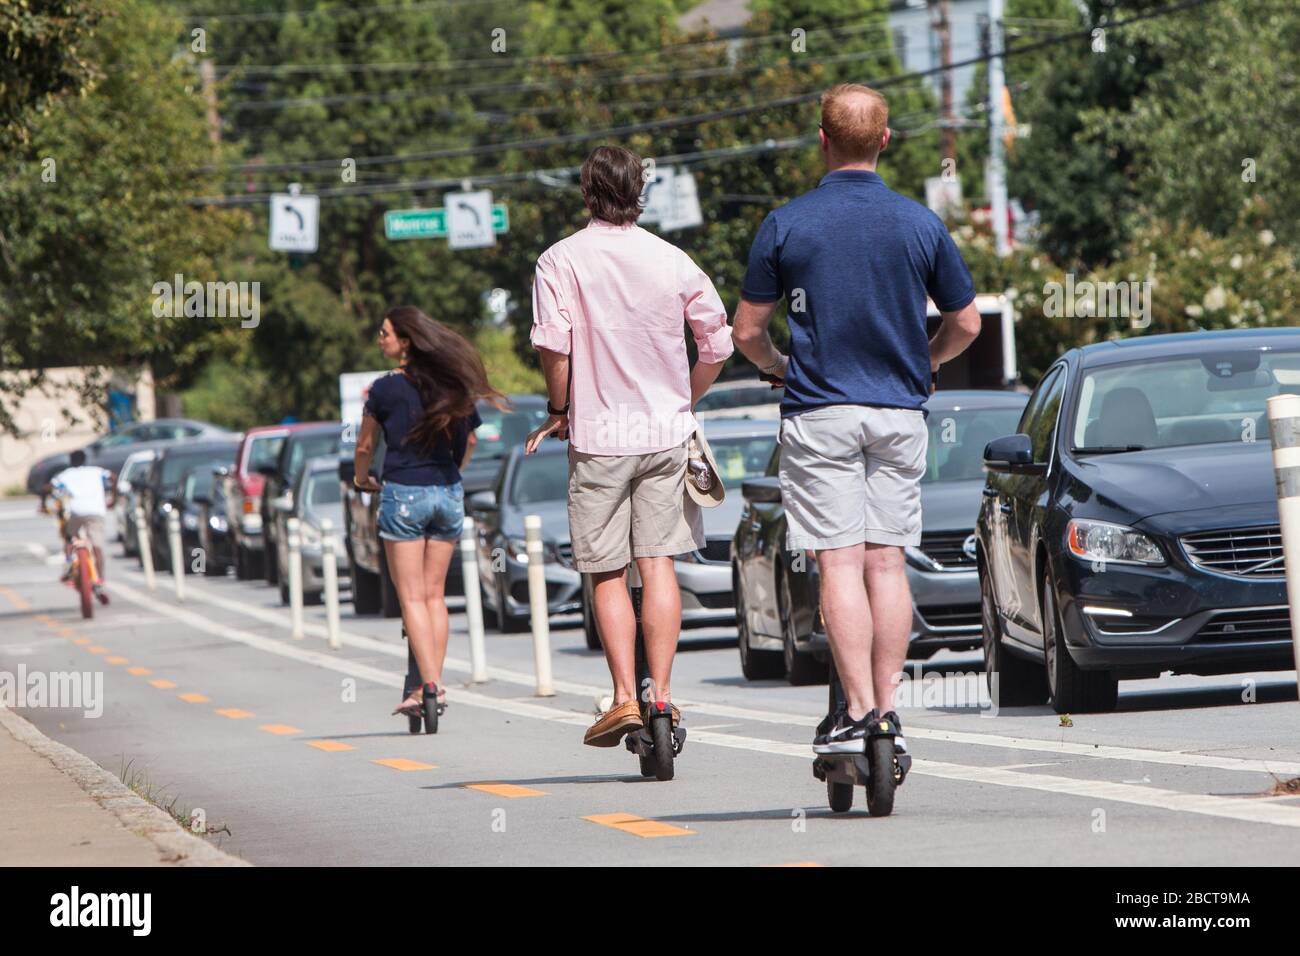 Several people on motorized scooters ride through the bike lane on a street alongside Piedmont Park on August 10, 2019 in Atlanta, GA. Stock Photo